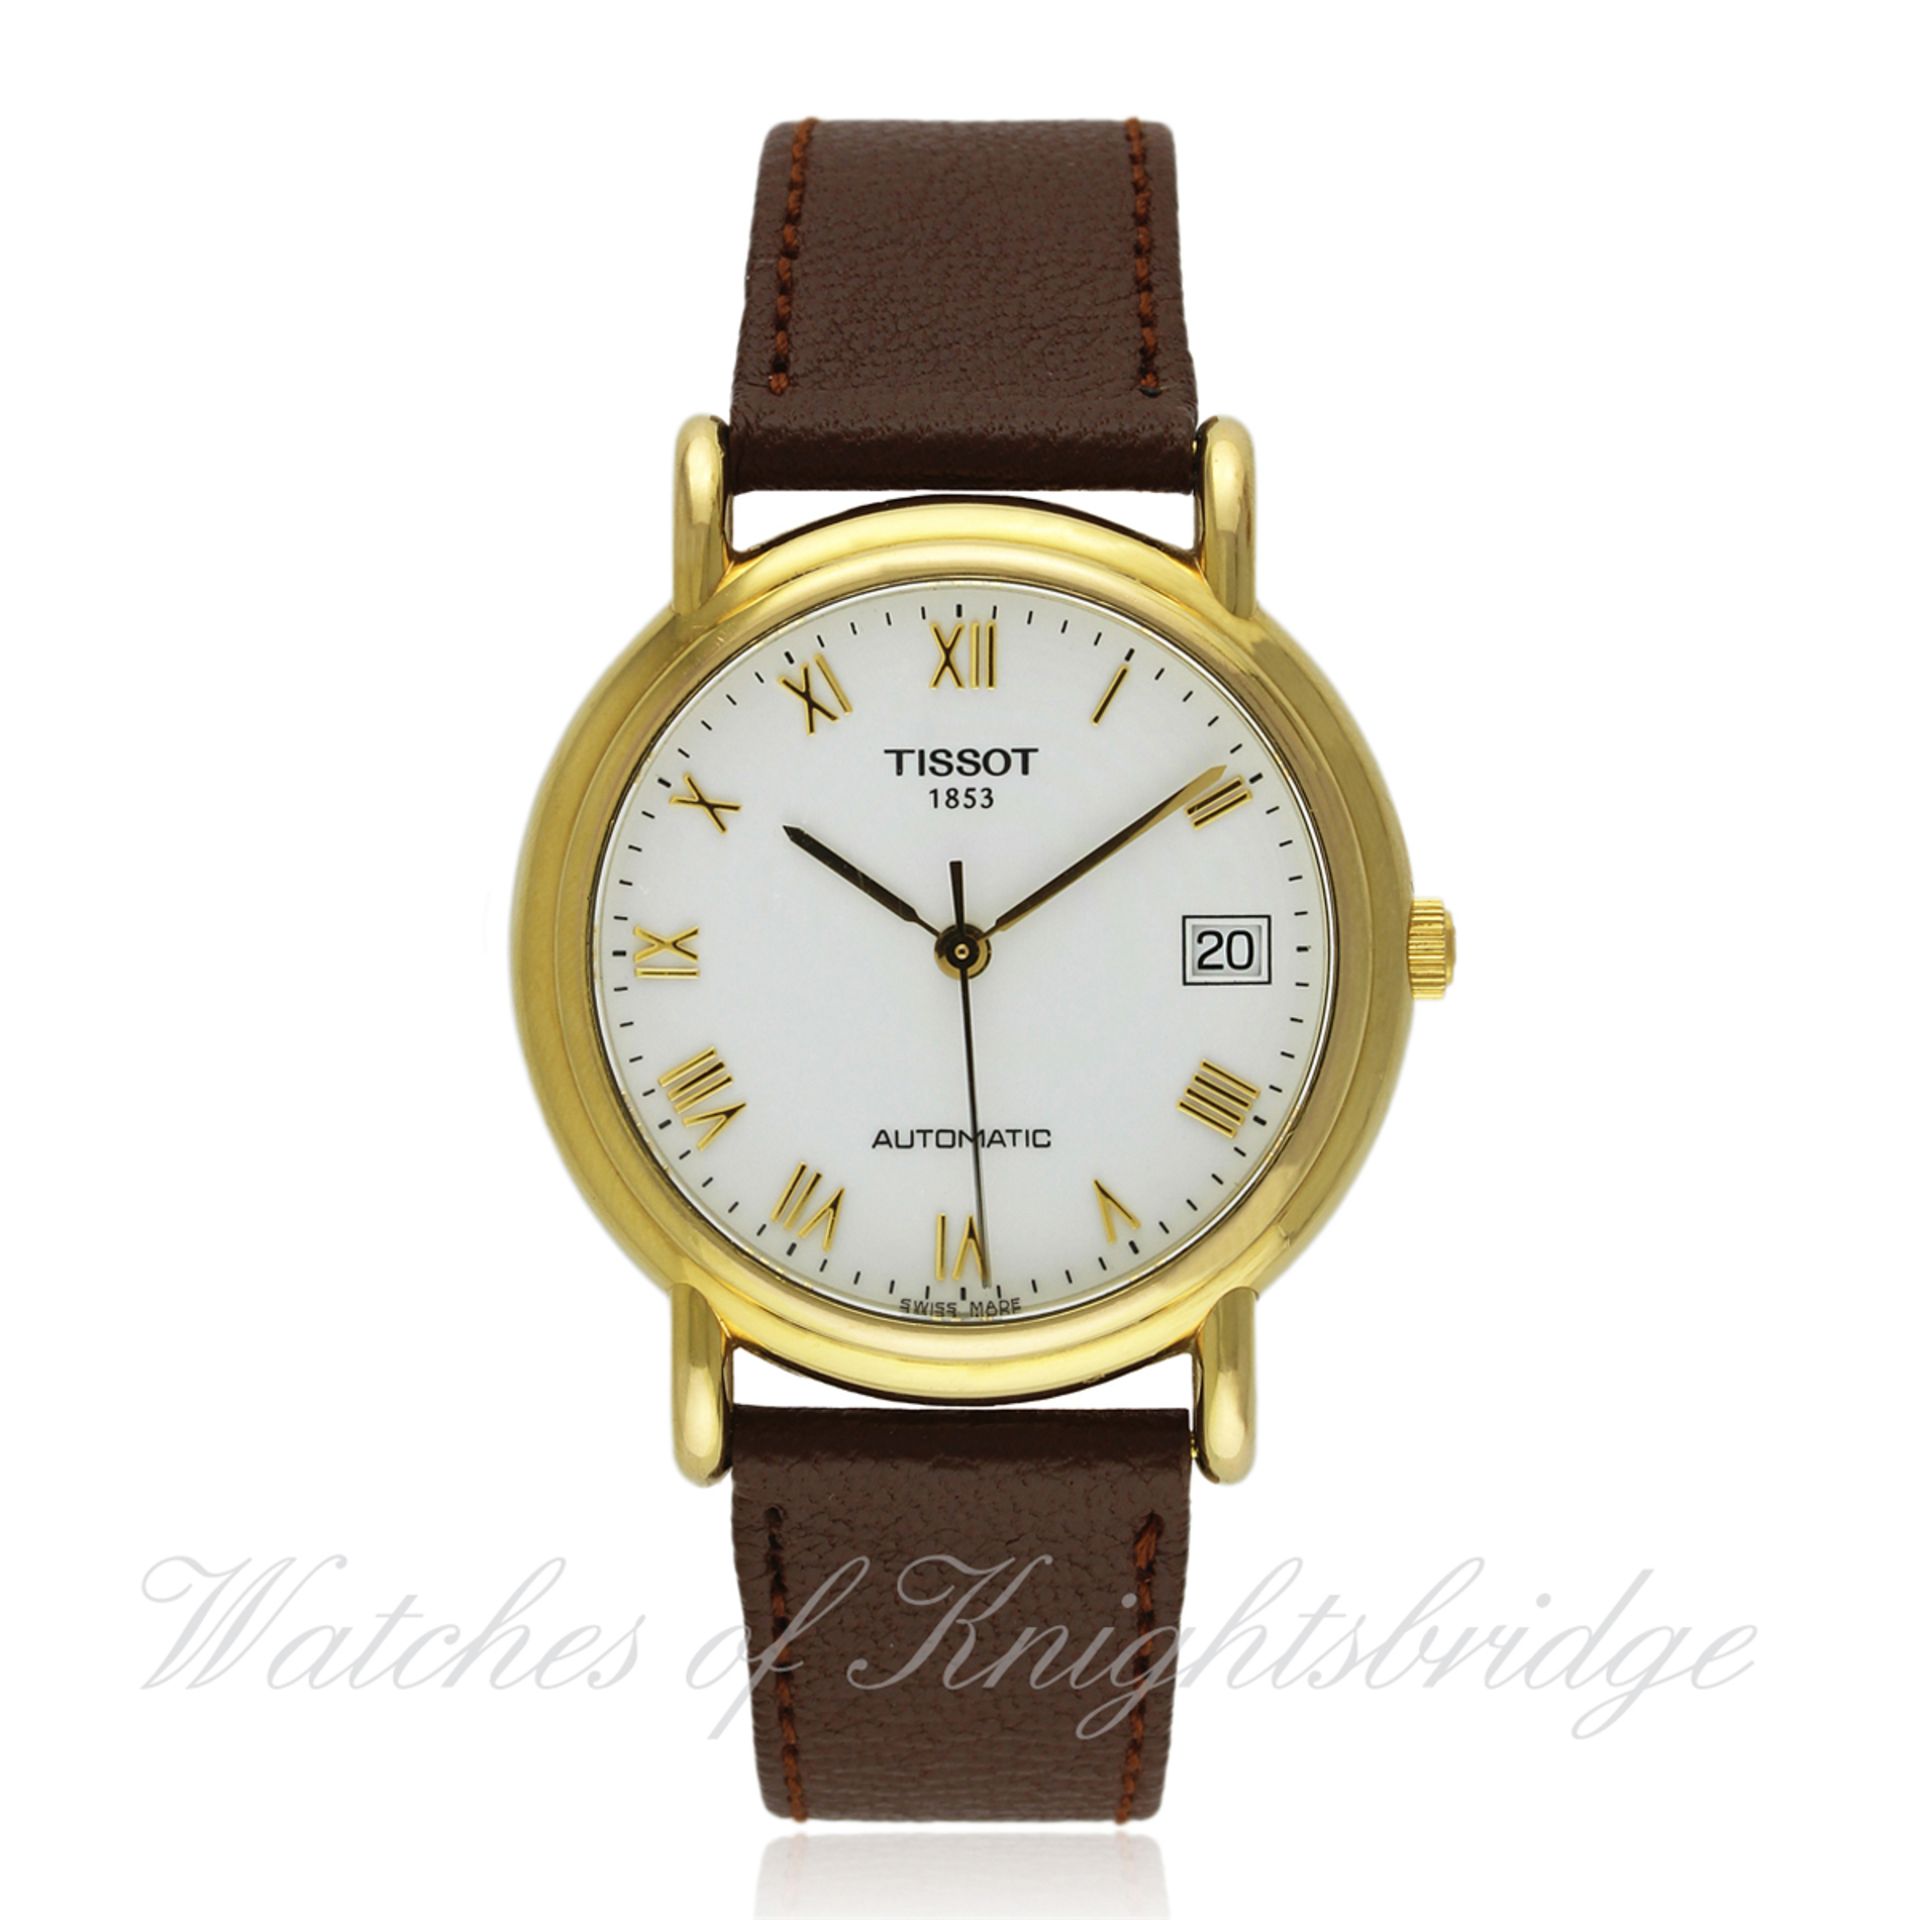 A GENTLEMAN`S 18K SOLID GOLD TISSOT AUTOMATIC WRIST WATCH CIRCA 1990s D: White dial with raised gilt